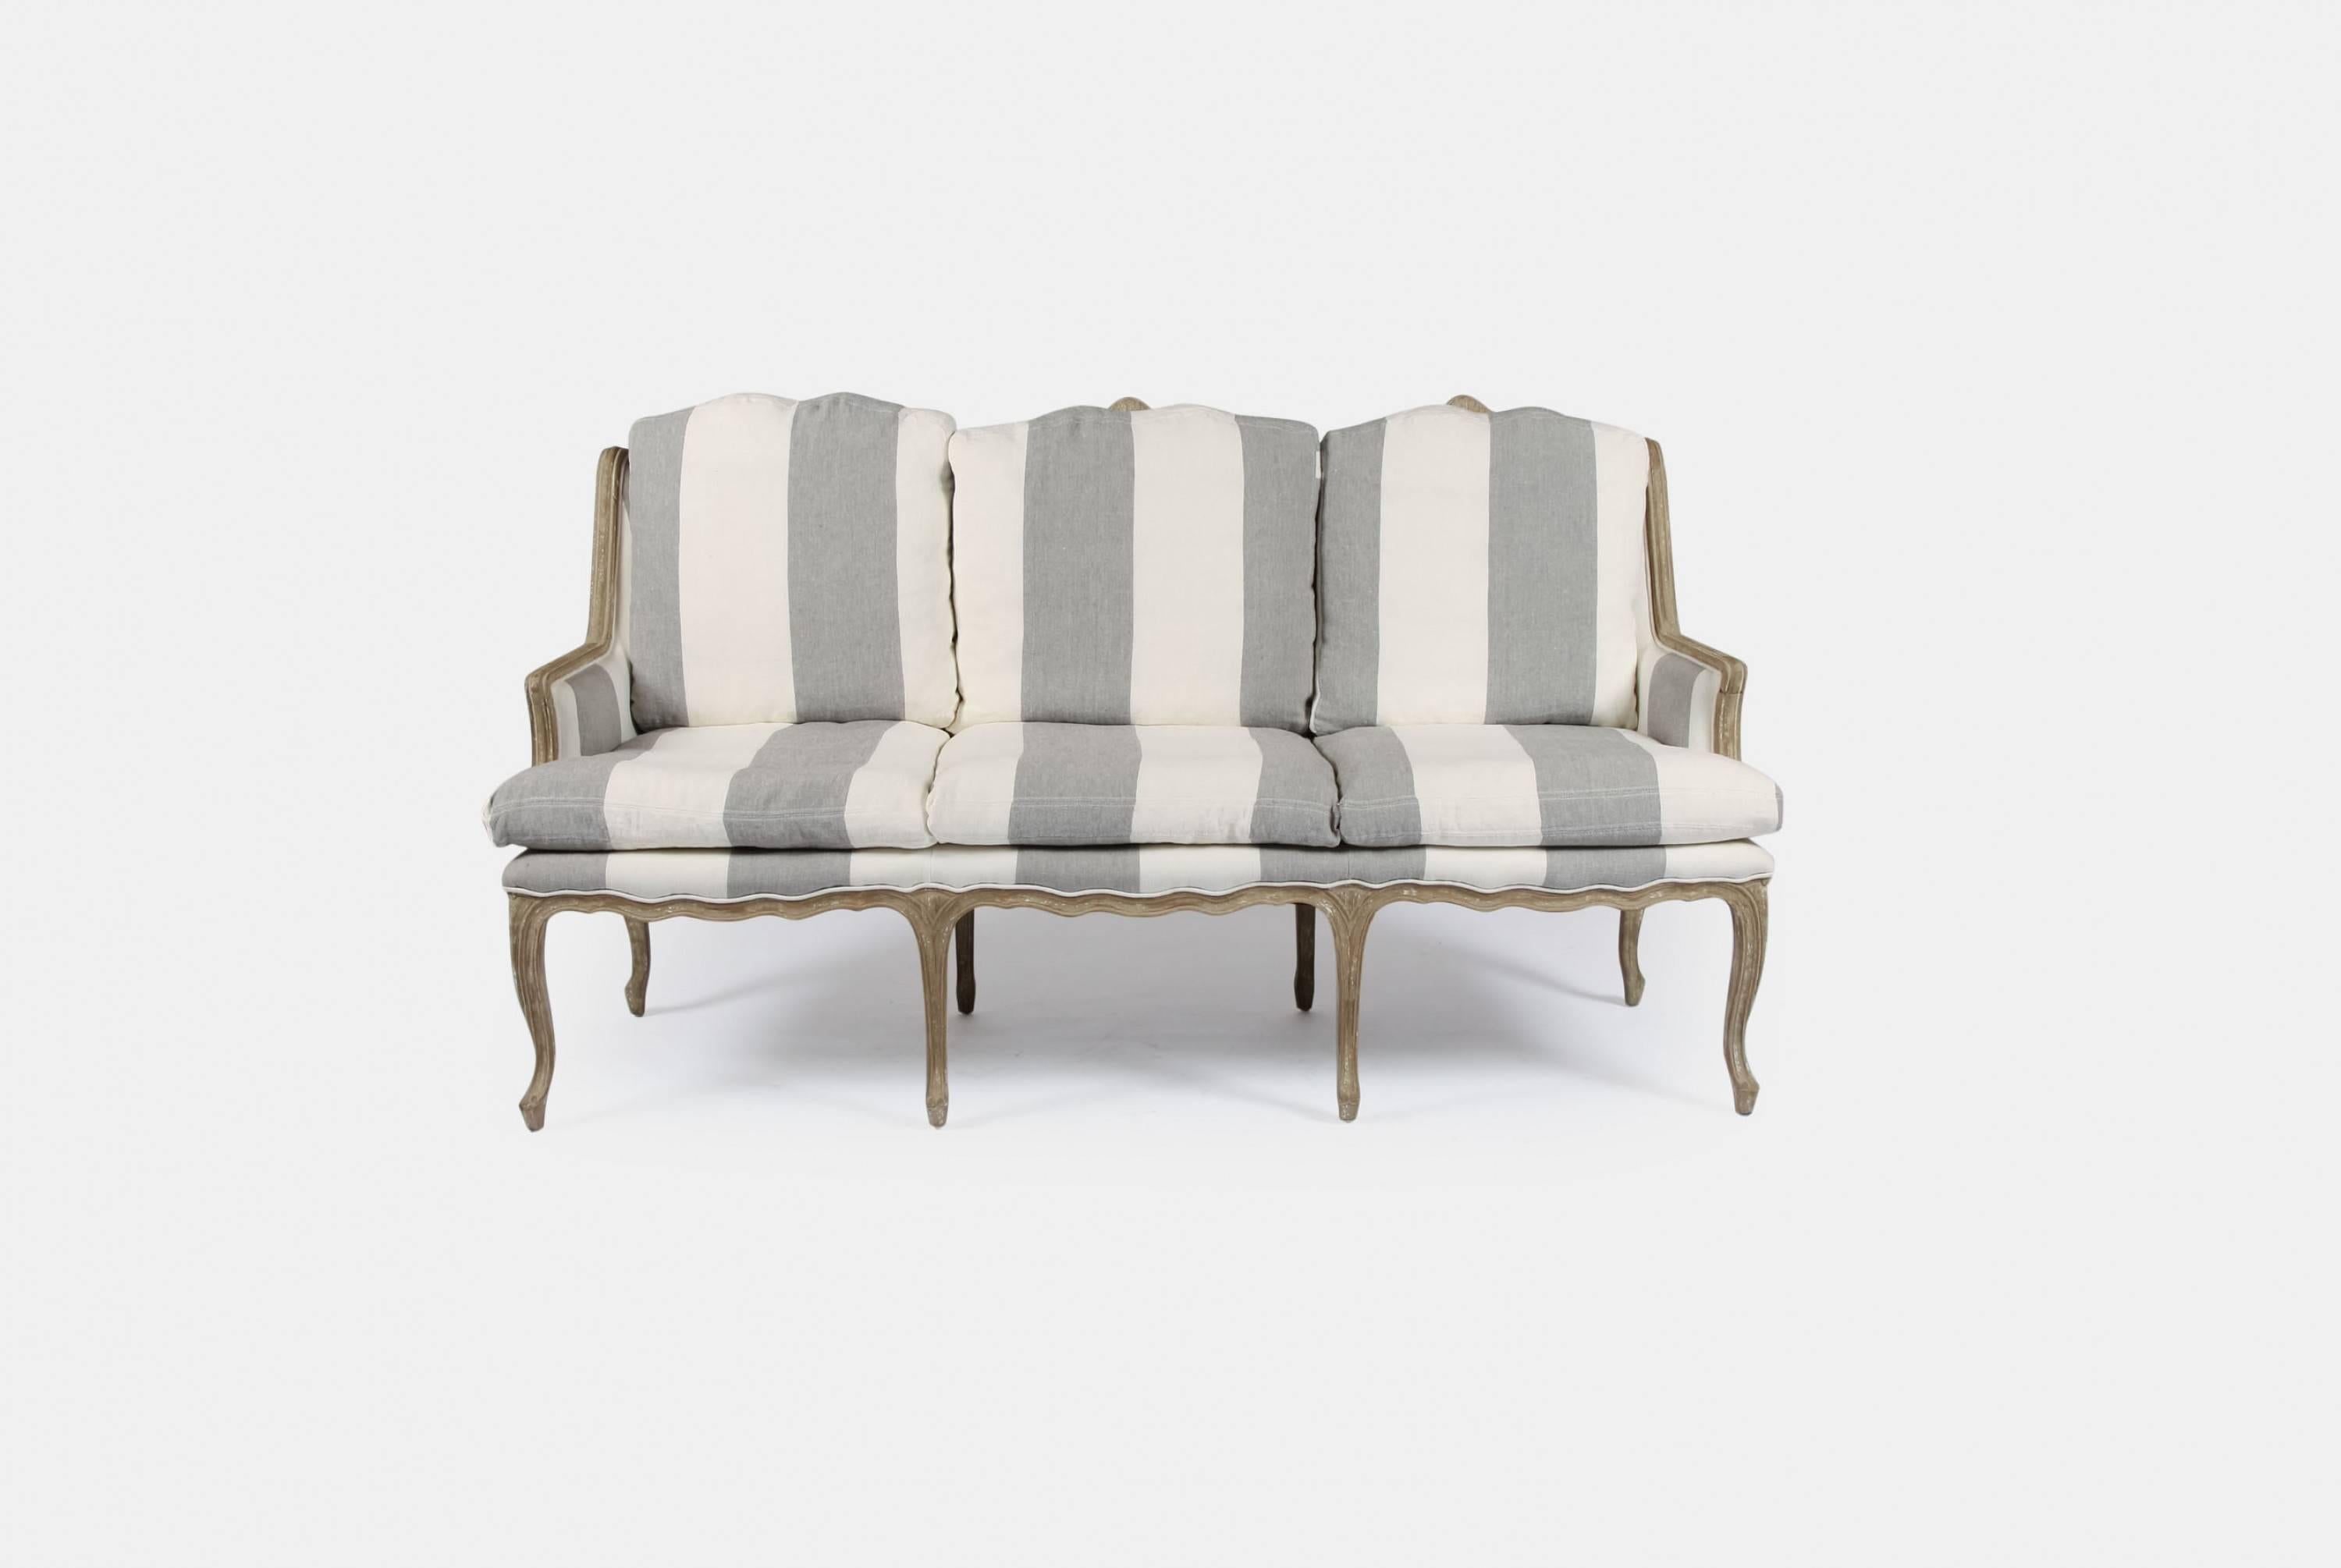 A stripe linen upholstered three-seat settee by Andrew Martin.

Since 1978, Andrew Martin has been at the forefront of global design from his base in London, United Kingdom. His aesthetic is neither defined by a single taste nor confined by a